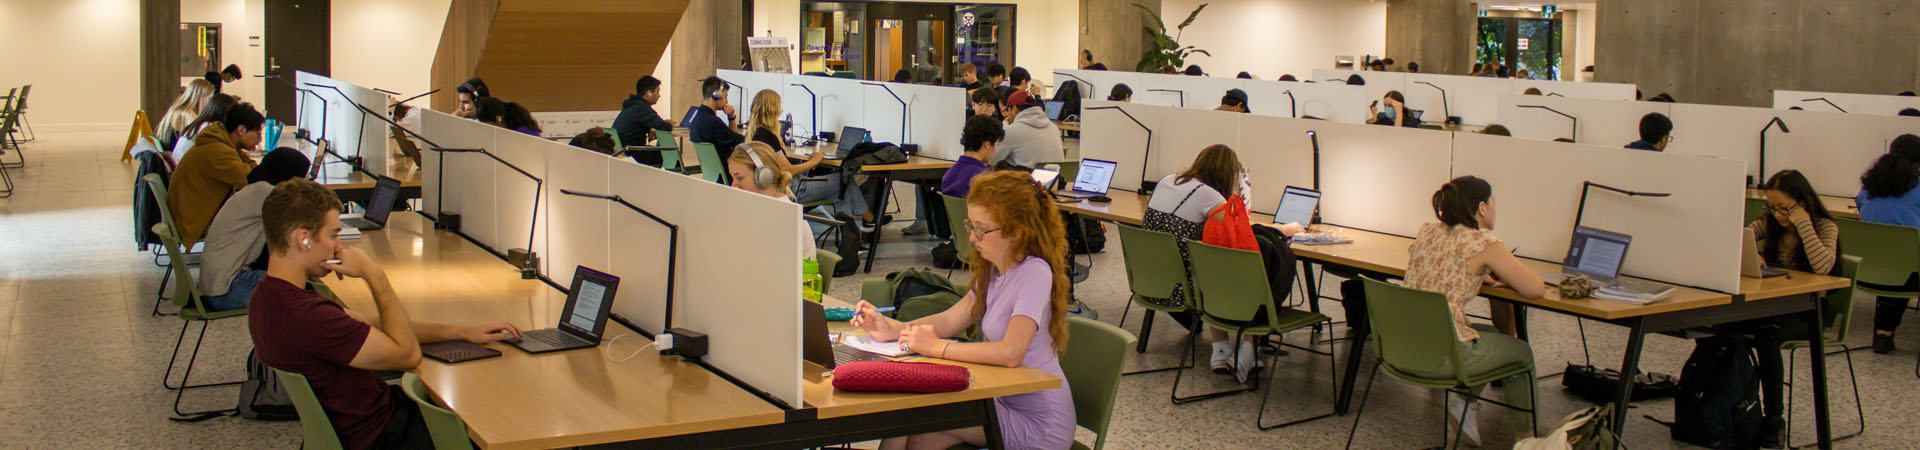 Students studying in the Weldon Learning Commons